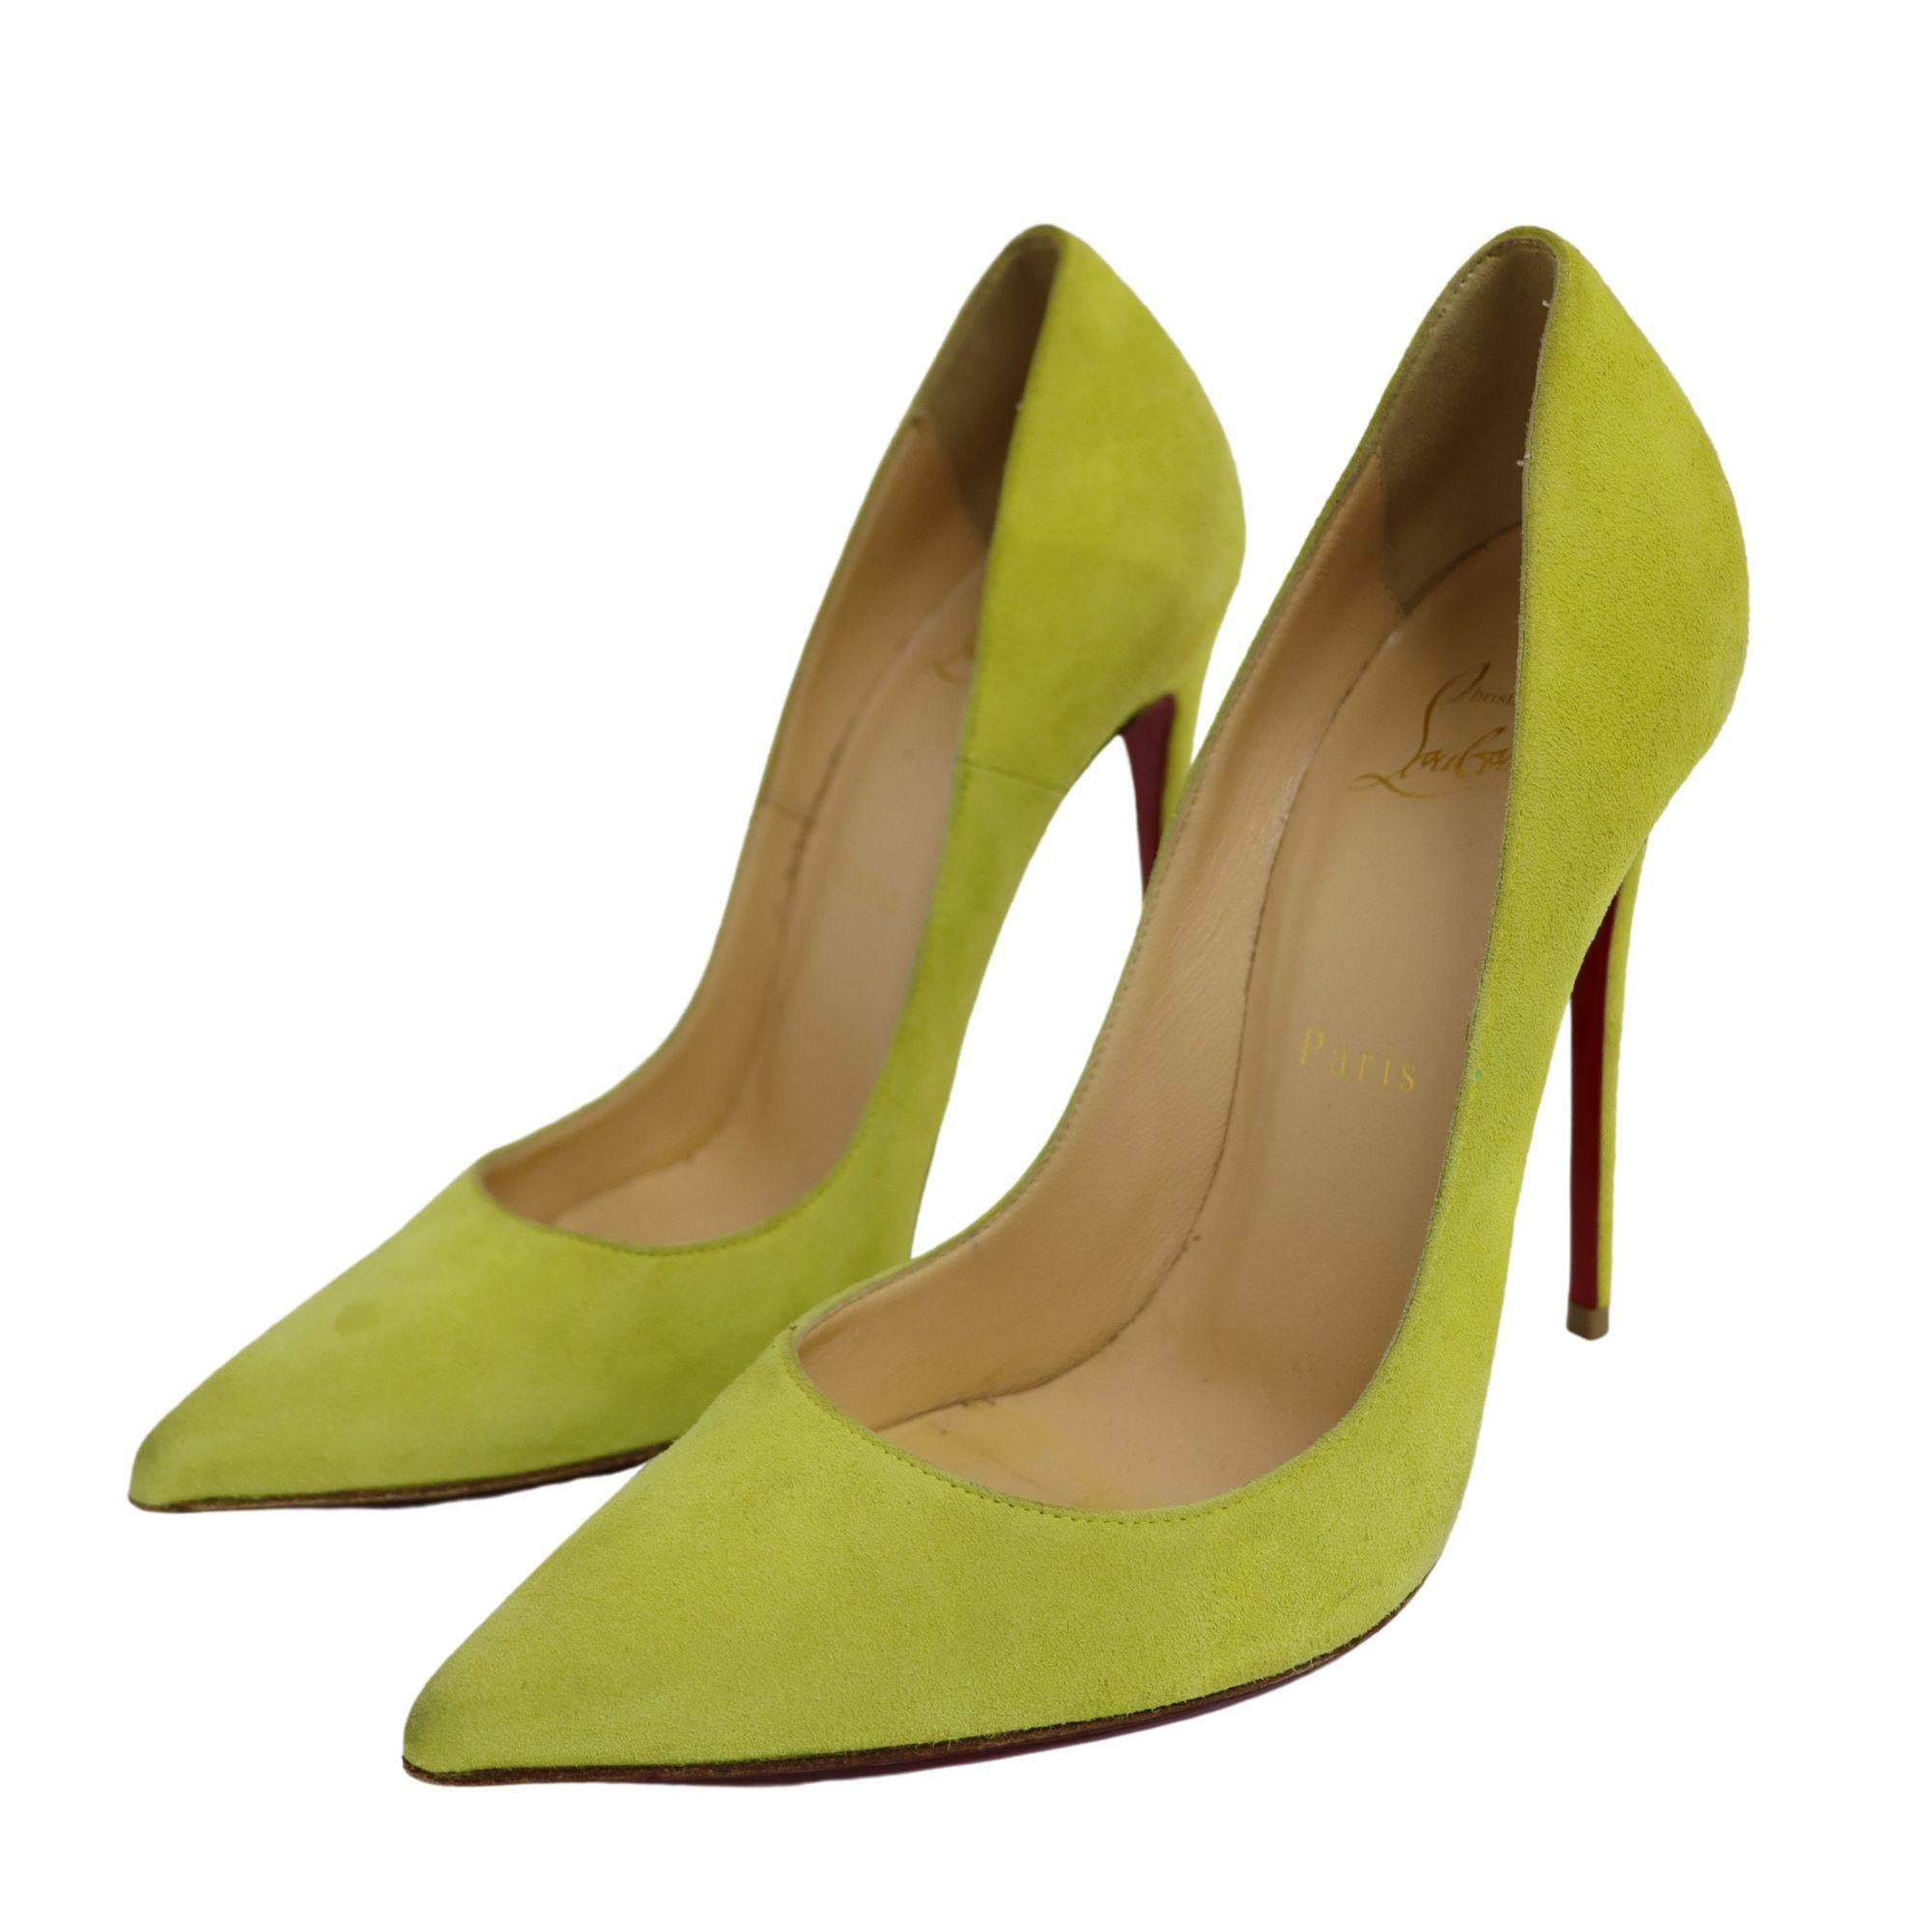 Christian Louboutin lime green suede 'So Kate' 120 Pumps. Great condition, consistent with minimal wear and use. A beautiful pop of color. Includes original dust bag

Size: 37.5
Heel Height: 12cm

Overall Condition: Good.
Interior Condition: signs